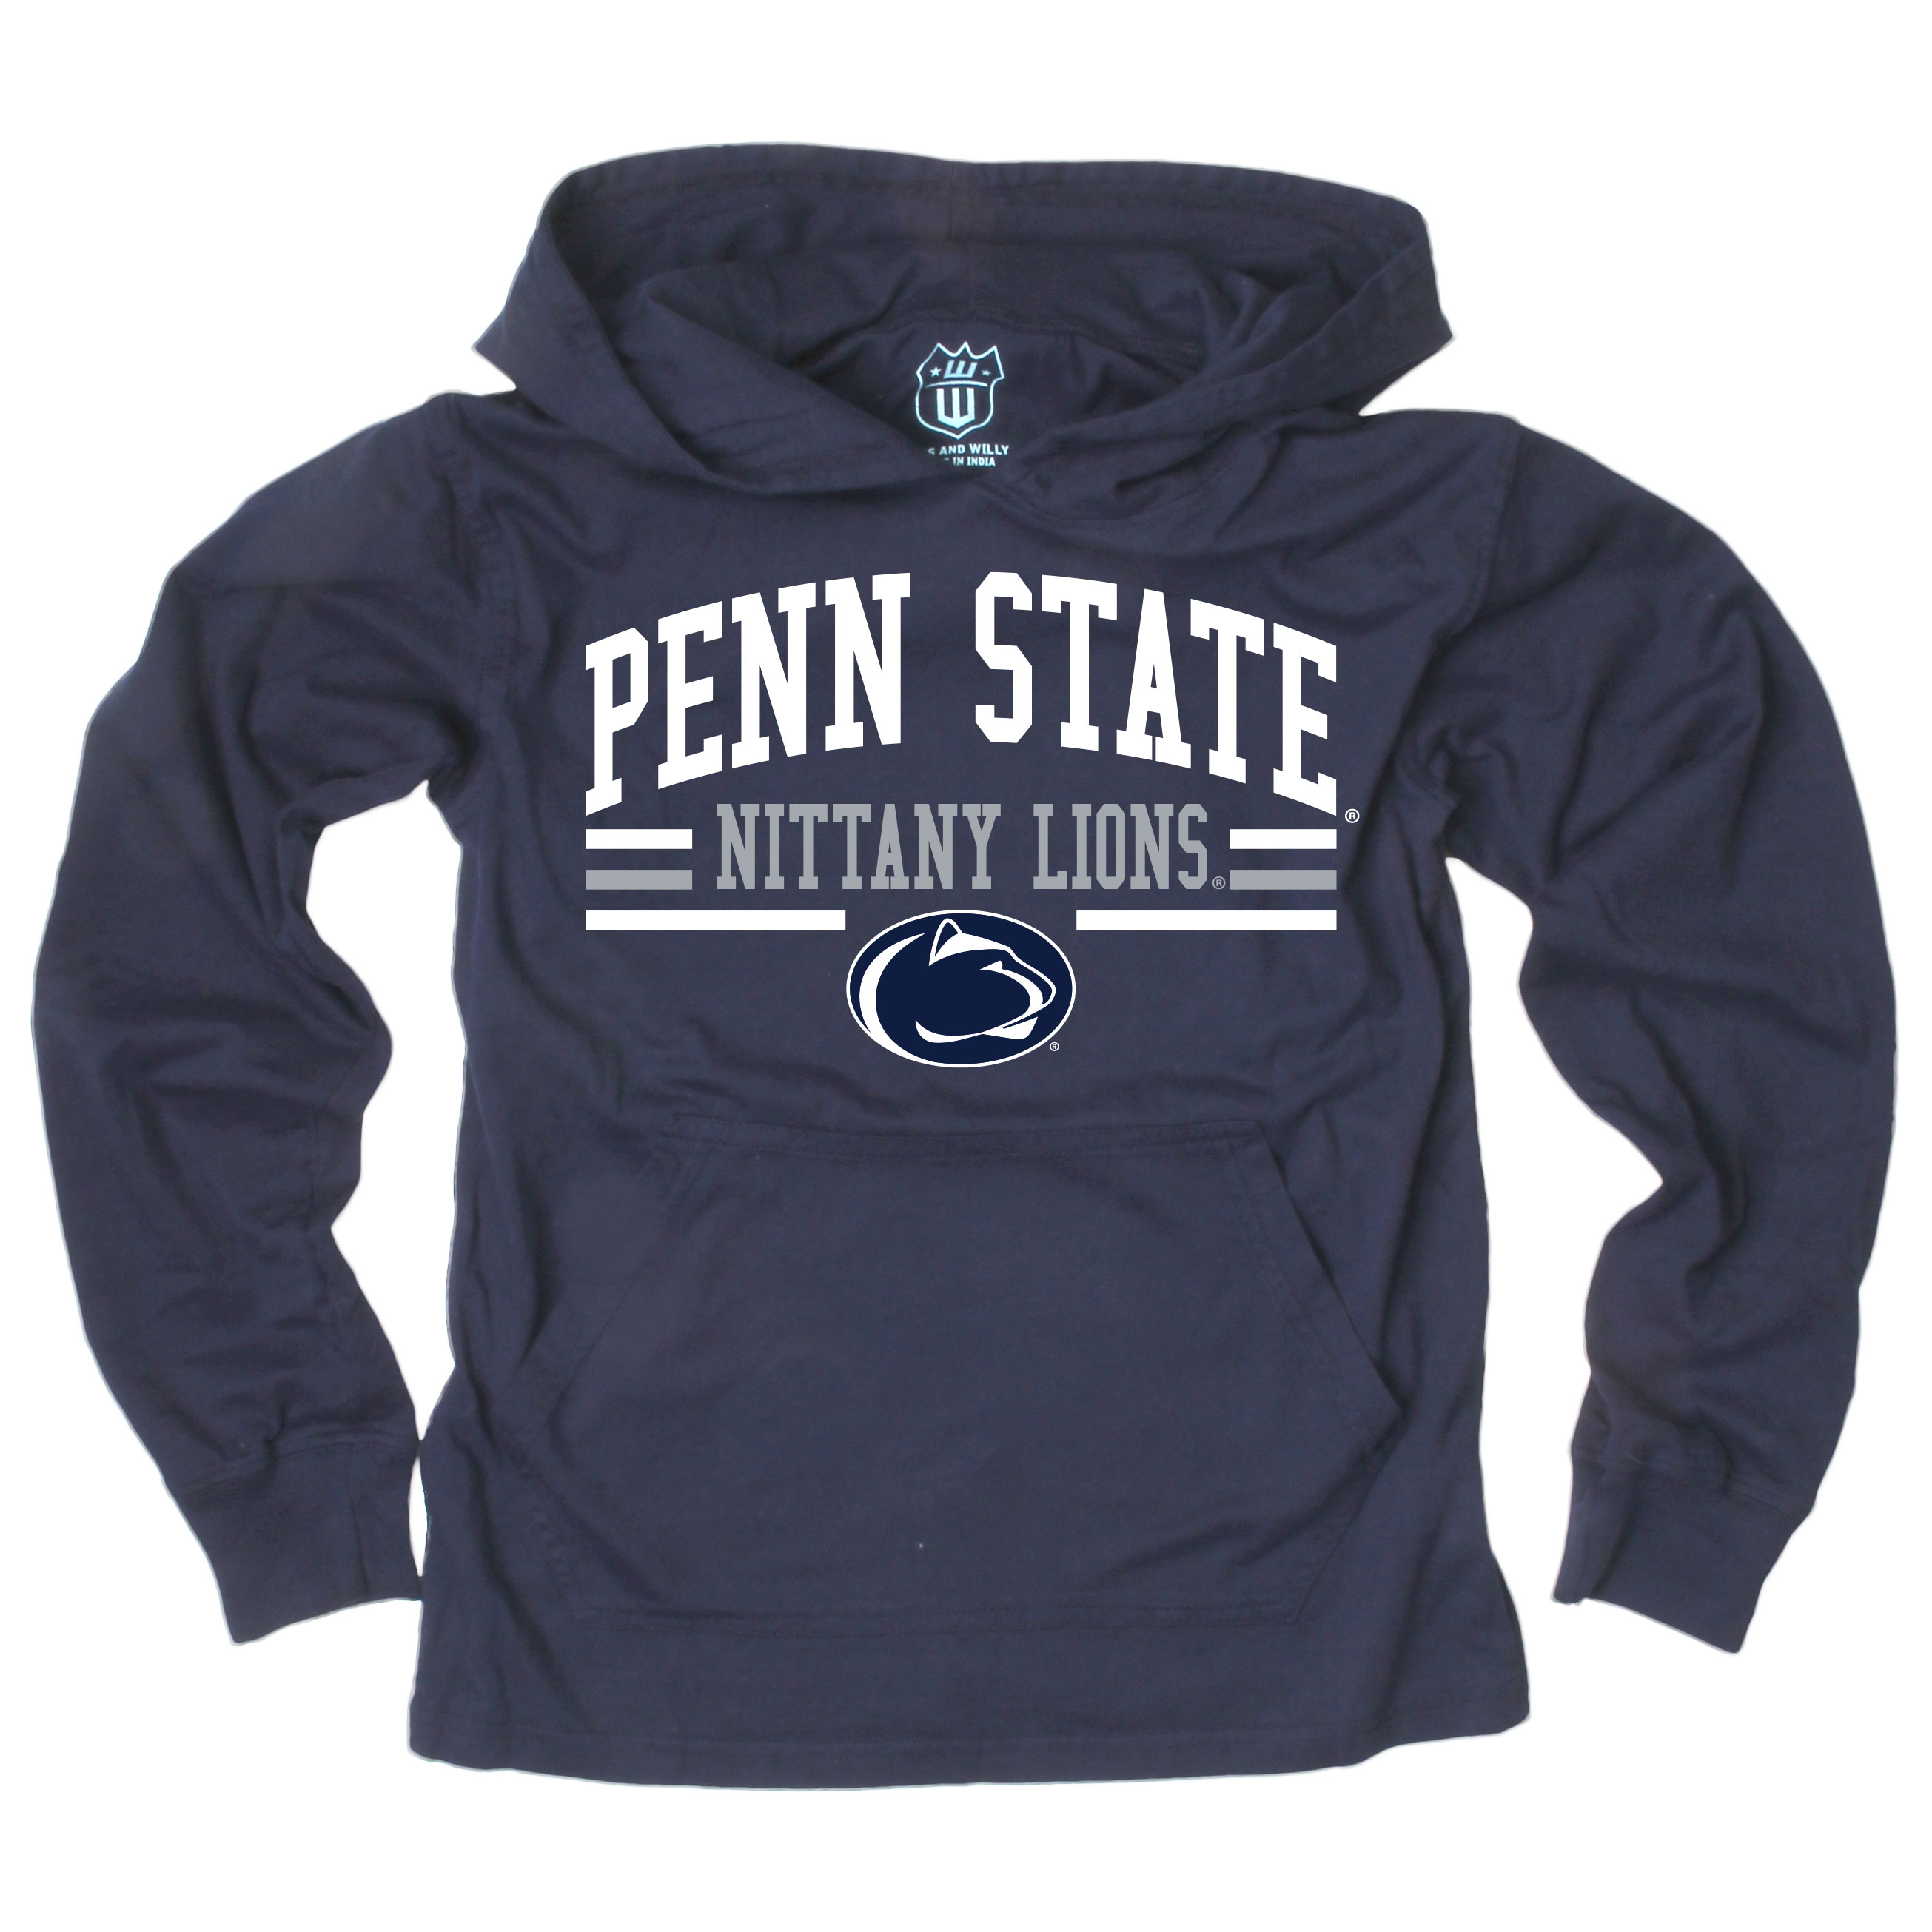 Wes And Willy Penn State Nittany Lions Youth Boys Long Sleeve Hooded T-Shirt